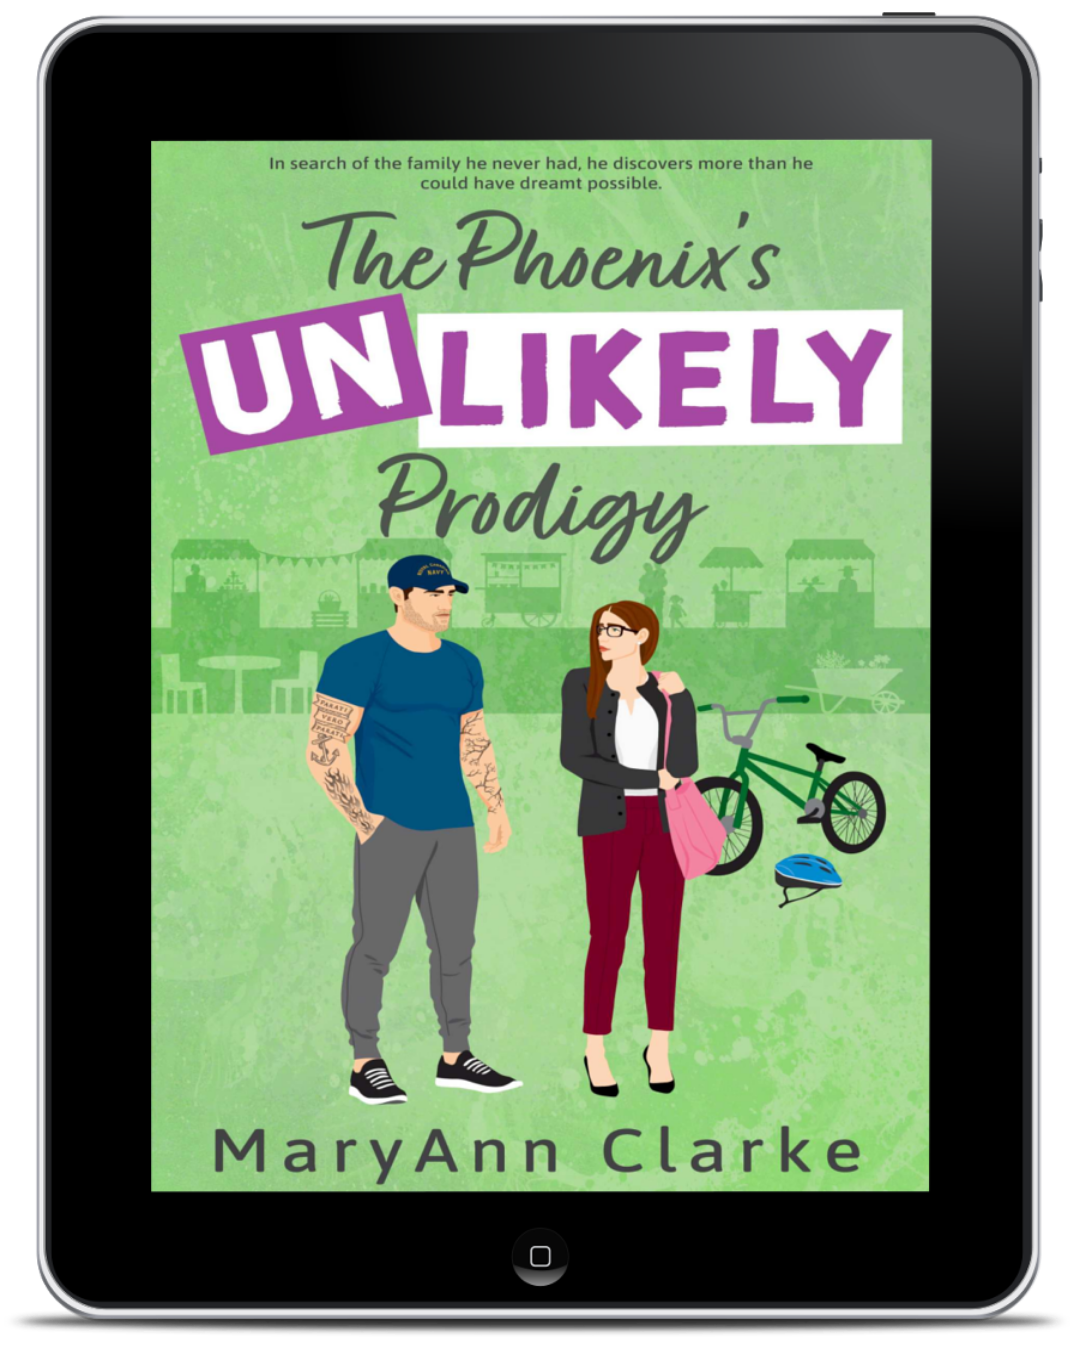 The Phoenix's UNLIKELY Prodigy (Kindle & ePub) - The UNLIKELY Series Book 2